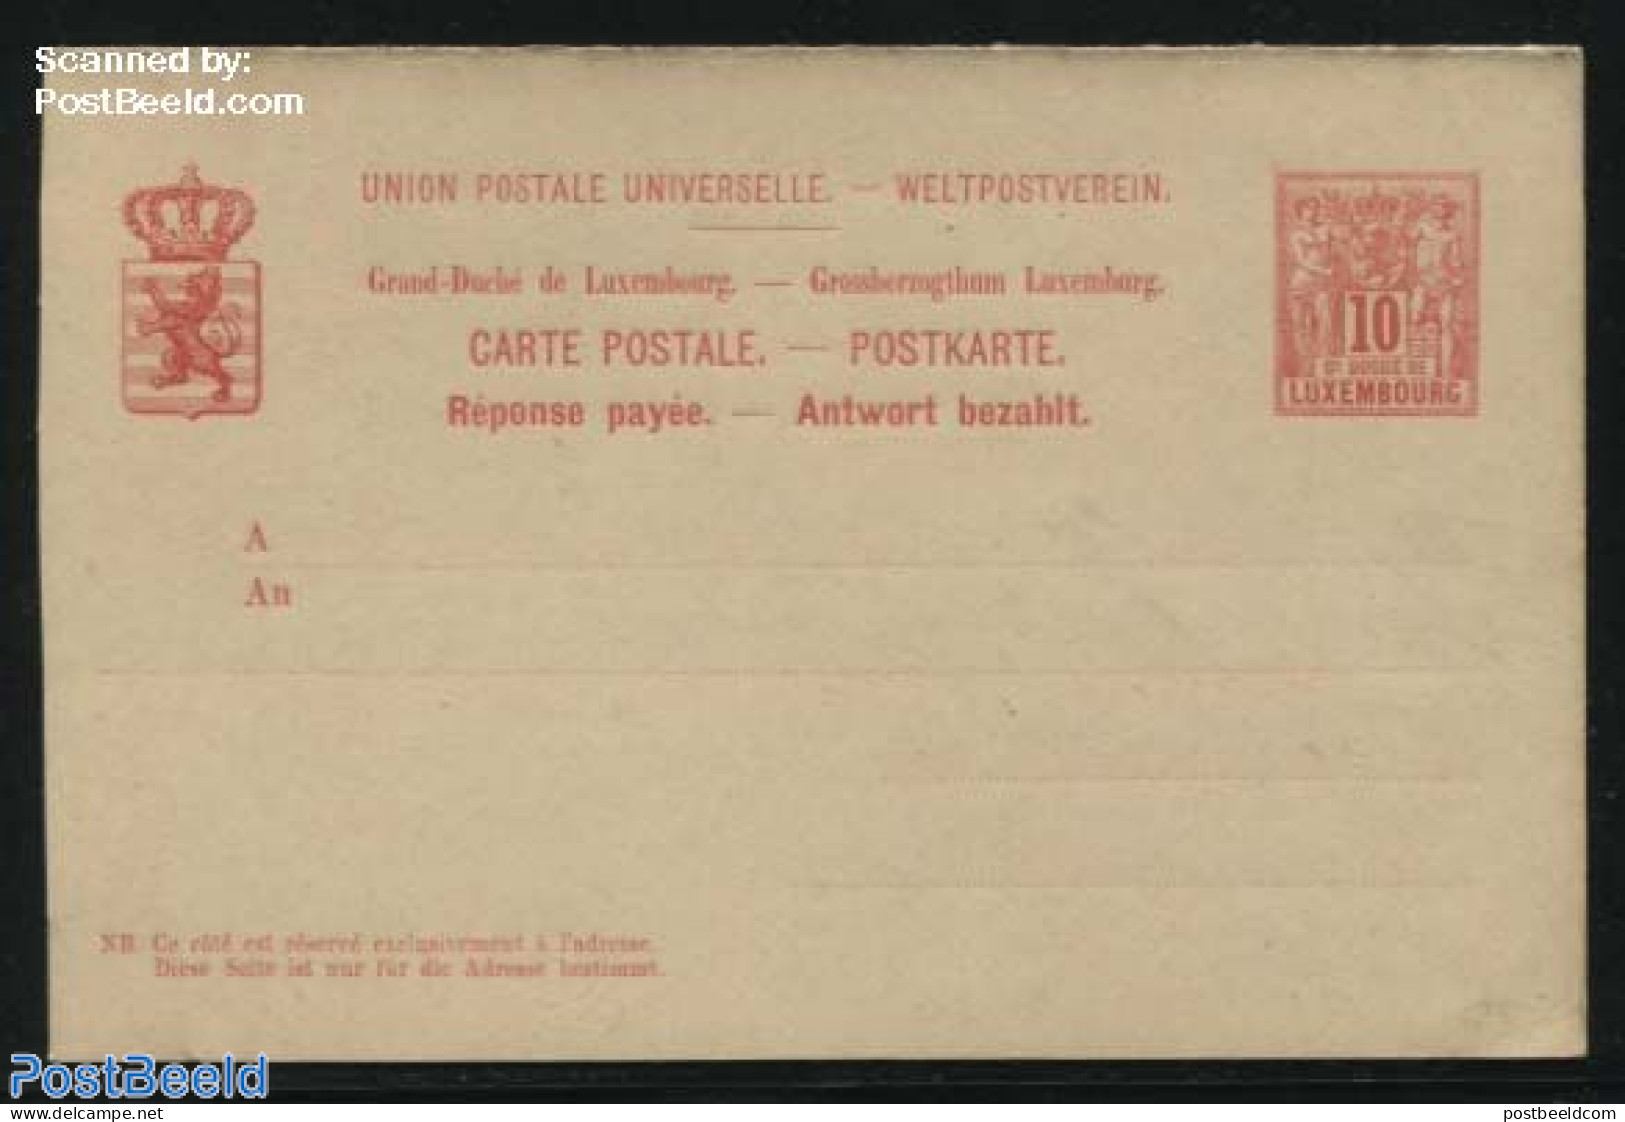 Luxemburg 1888 Reply Paid Postcard 10/10c 142x94mm, Unused Postal Stationary - Covers & Documents